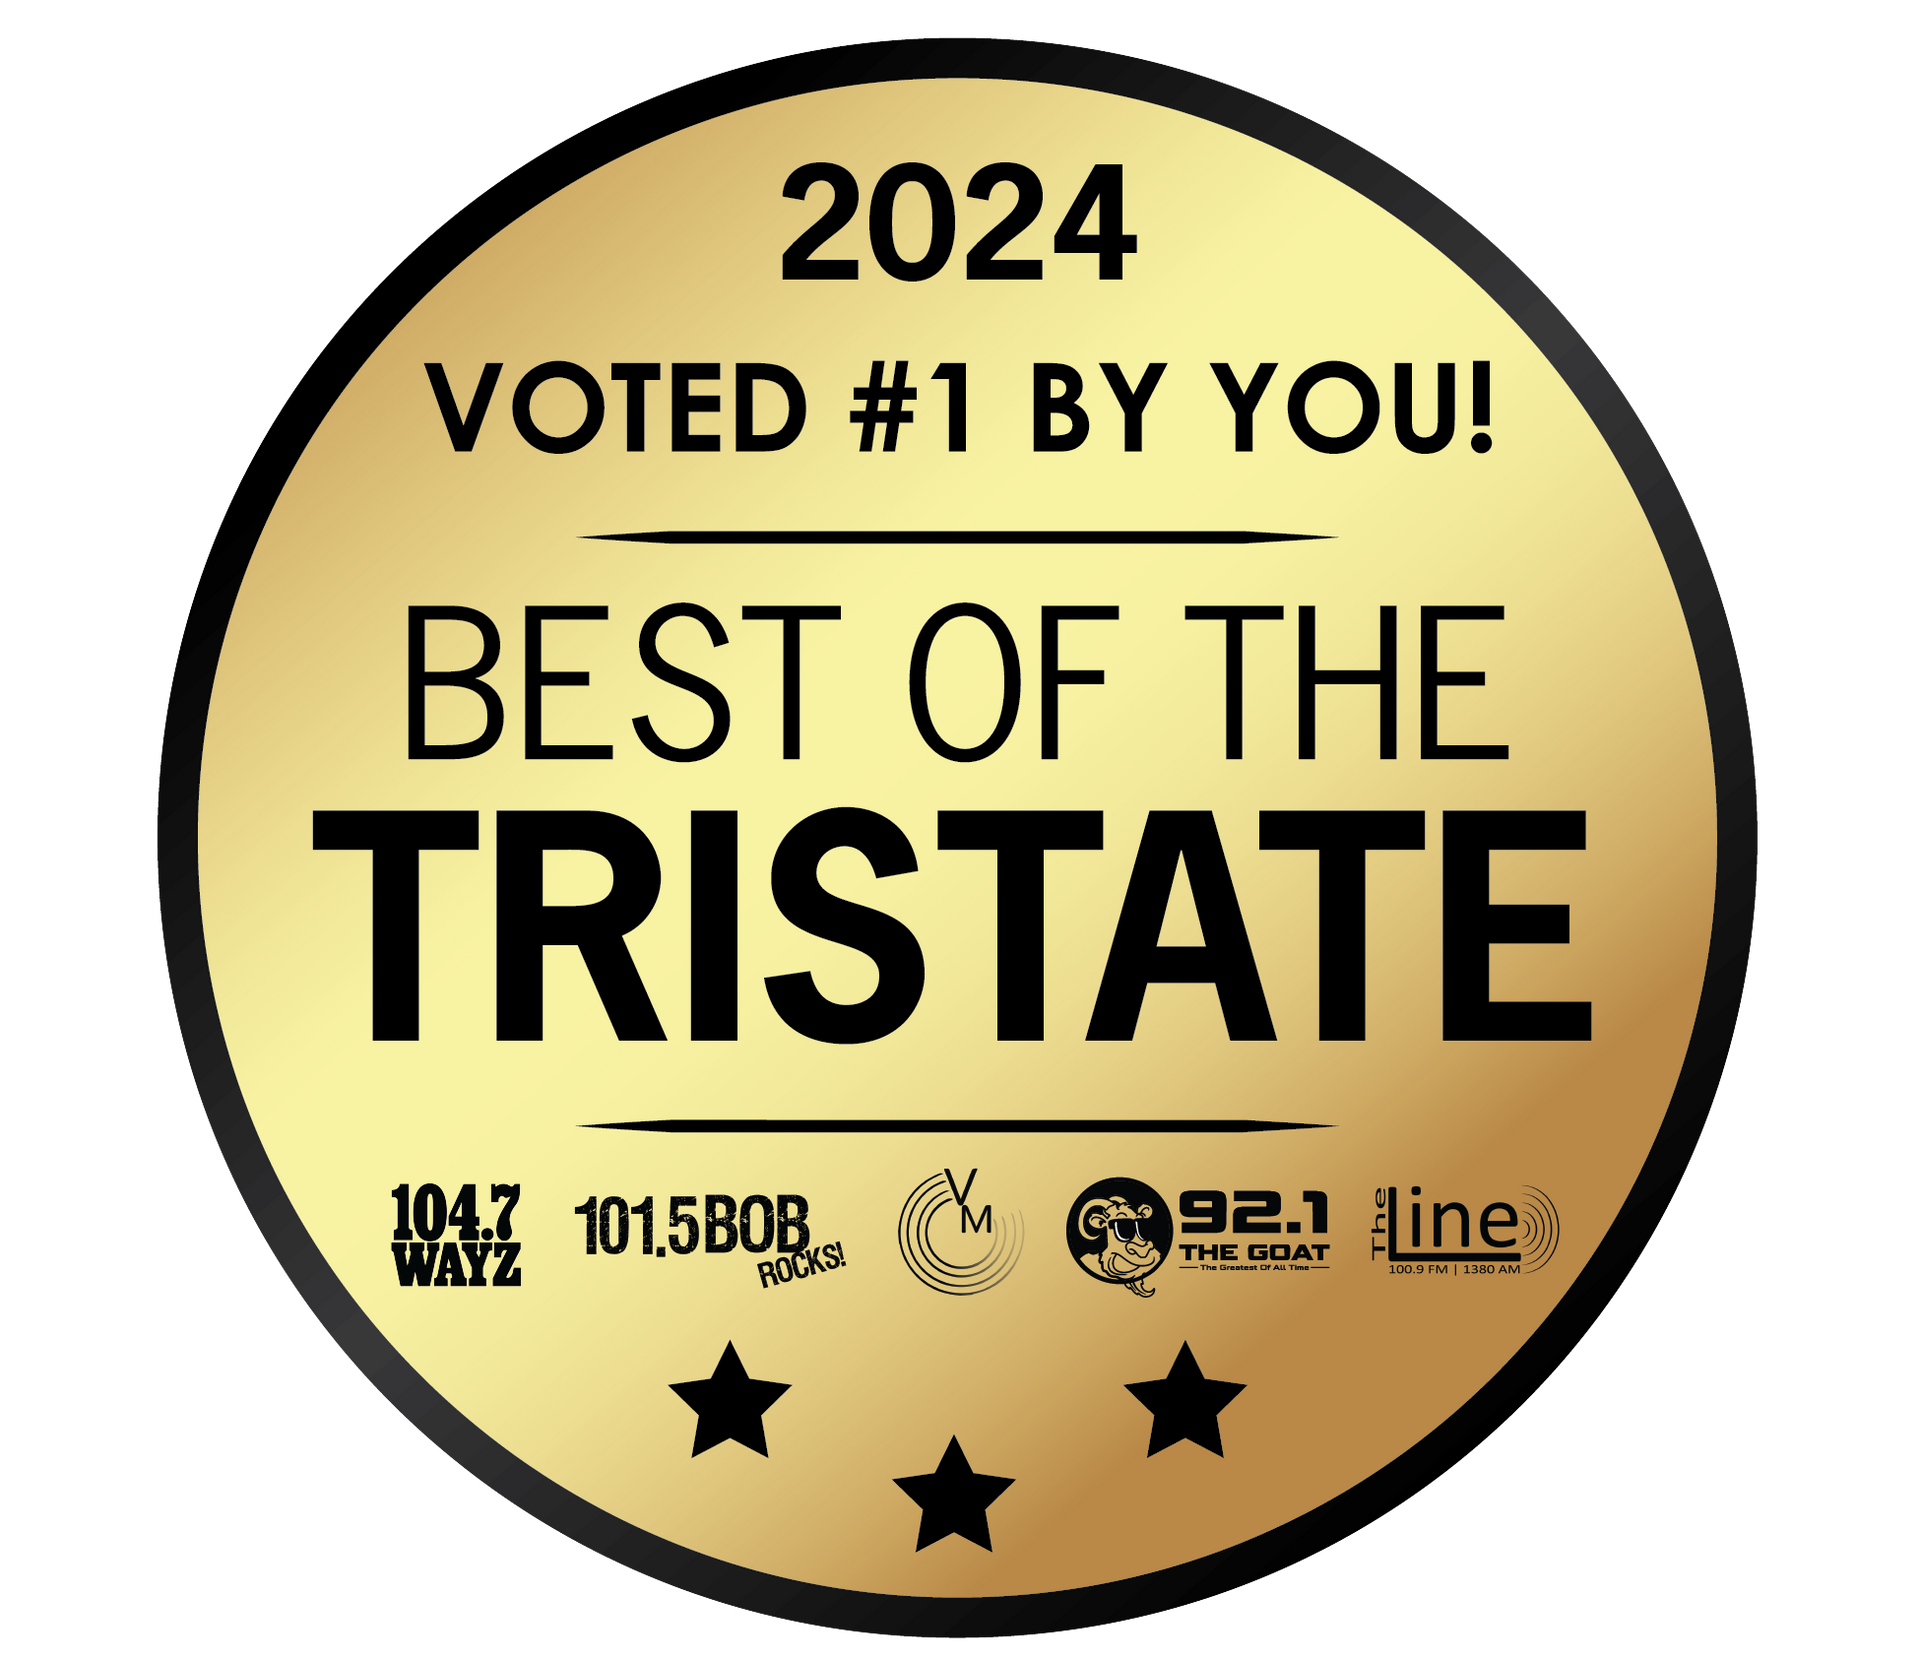 Best of the tristate 2024